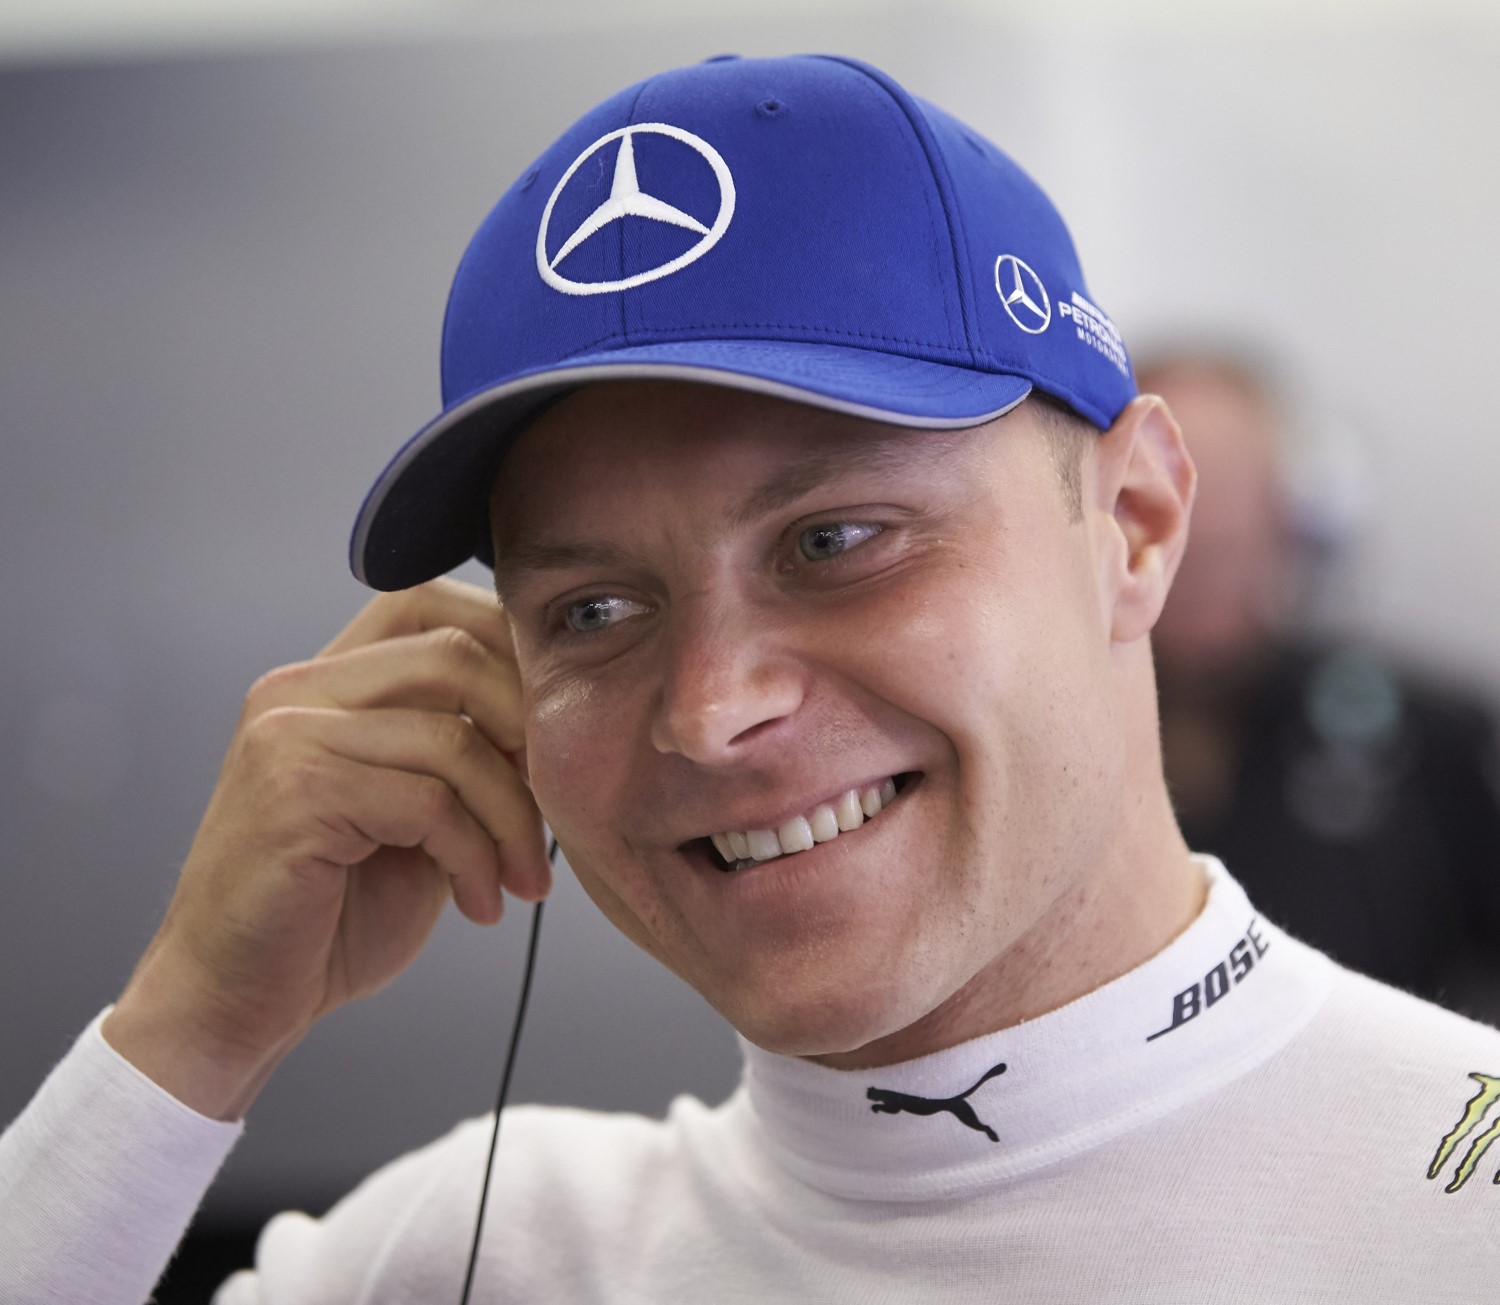 Bottas expected to re-sign